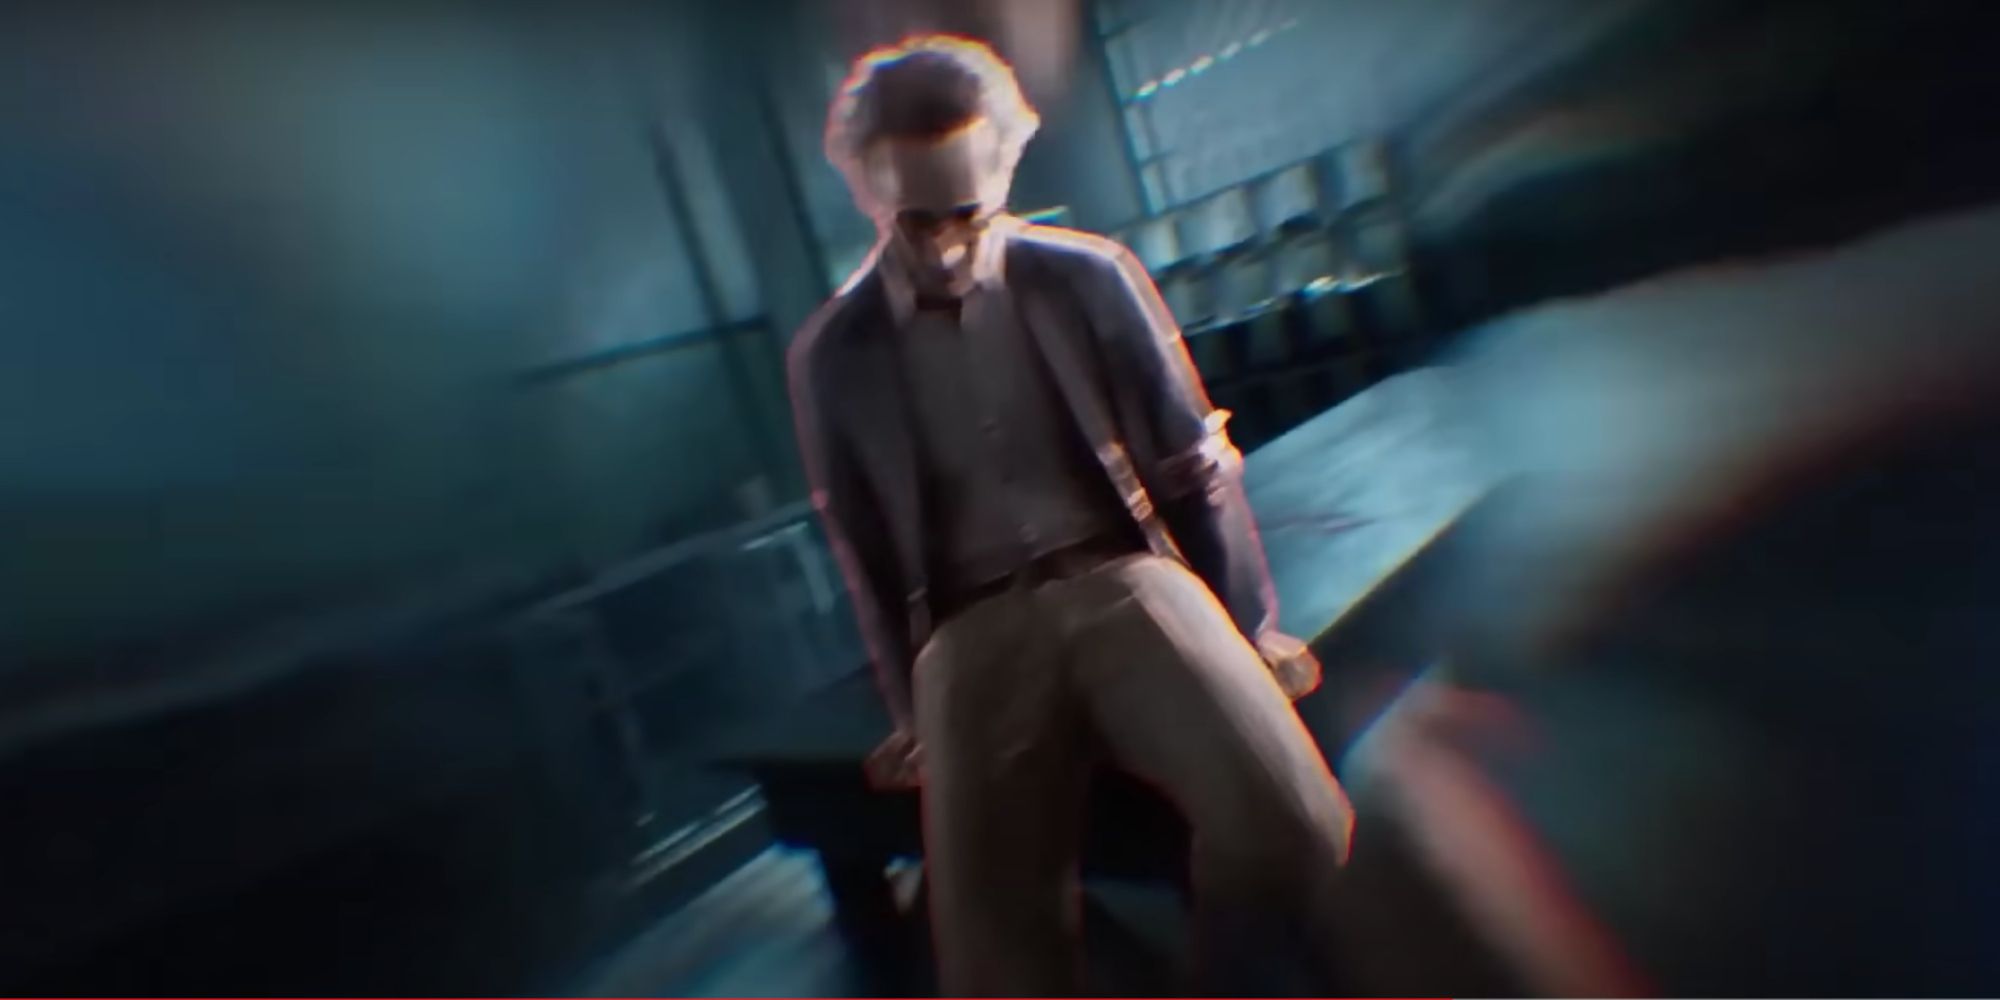 In the RE Death Island trailer, another person's POV shows Dr. Reclining on a desk.  Taylor's blurry look.